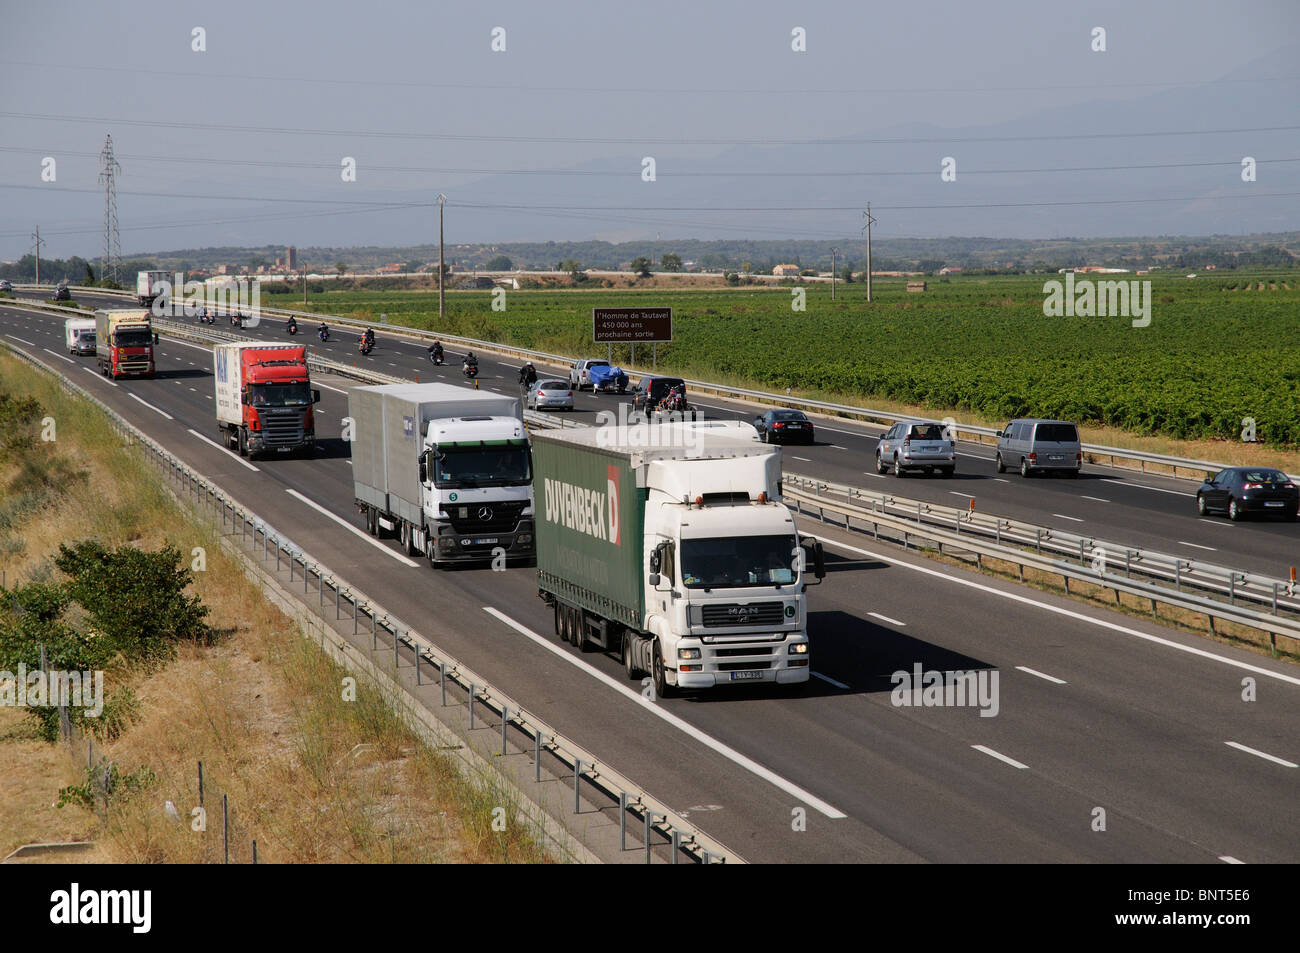 A9 autoroute carriageways seen north of Perpignan southern France Lorries using French motorway route Stock Photo